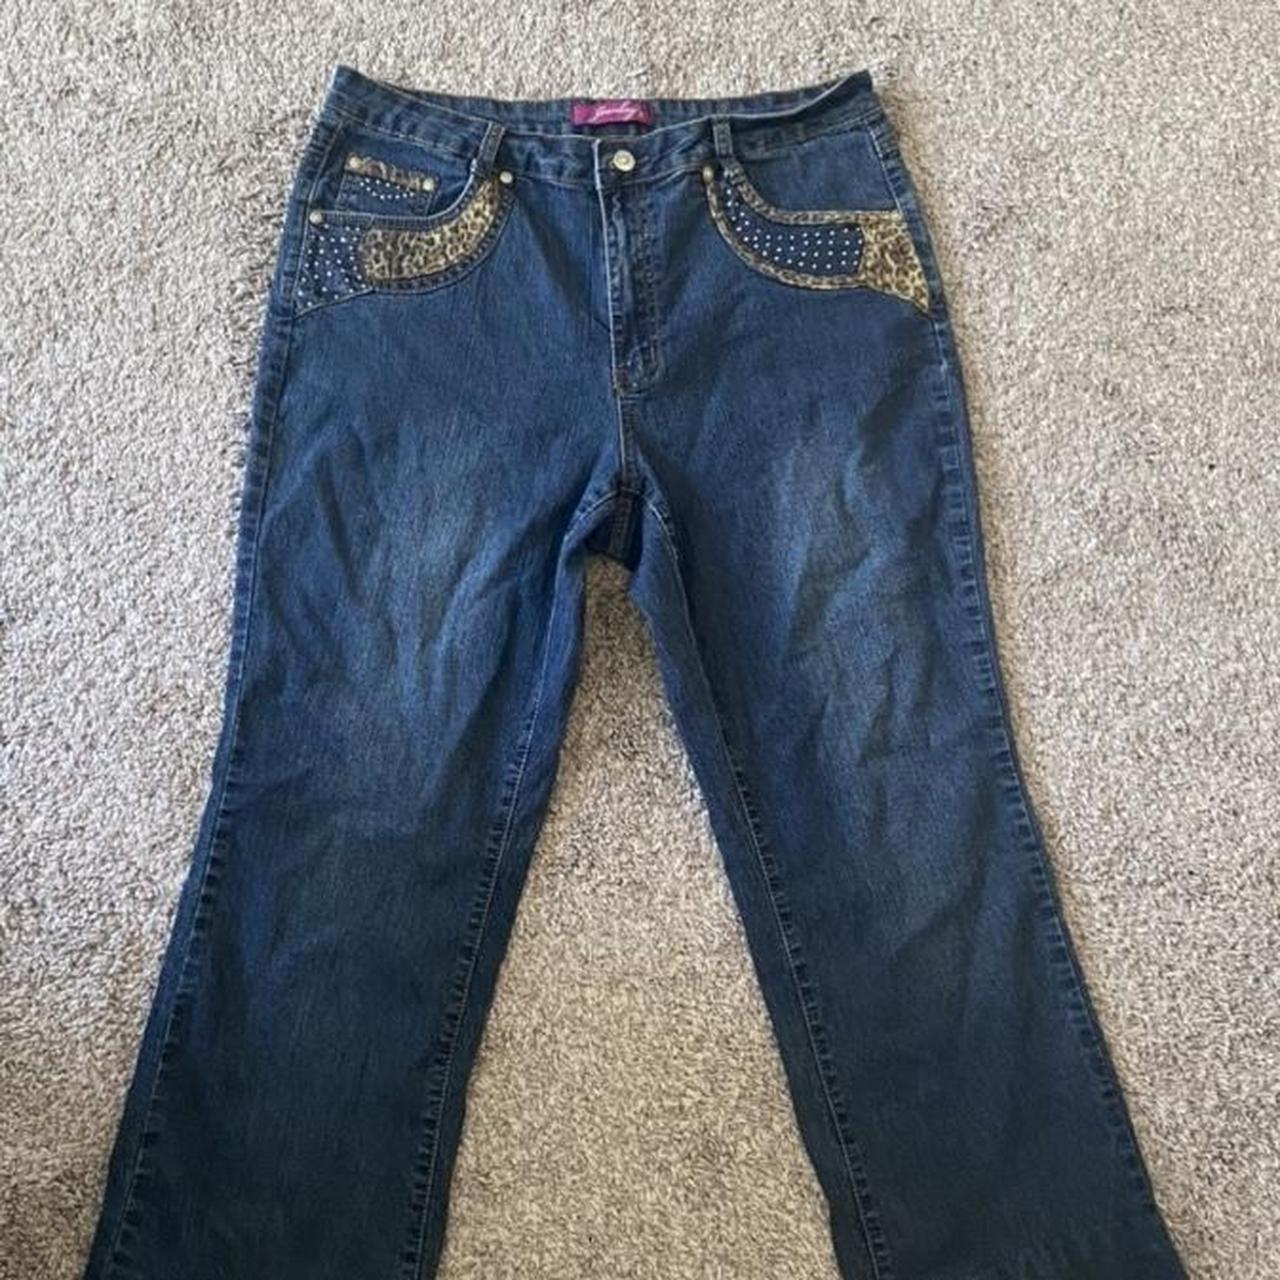 Women's Navy and Brown Jeans